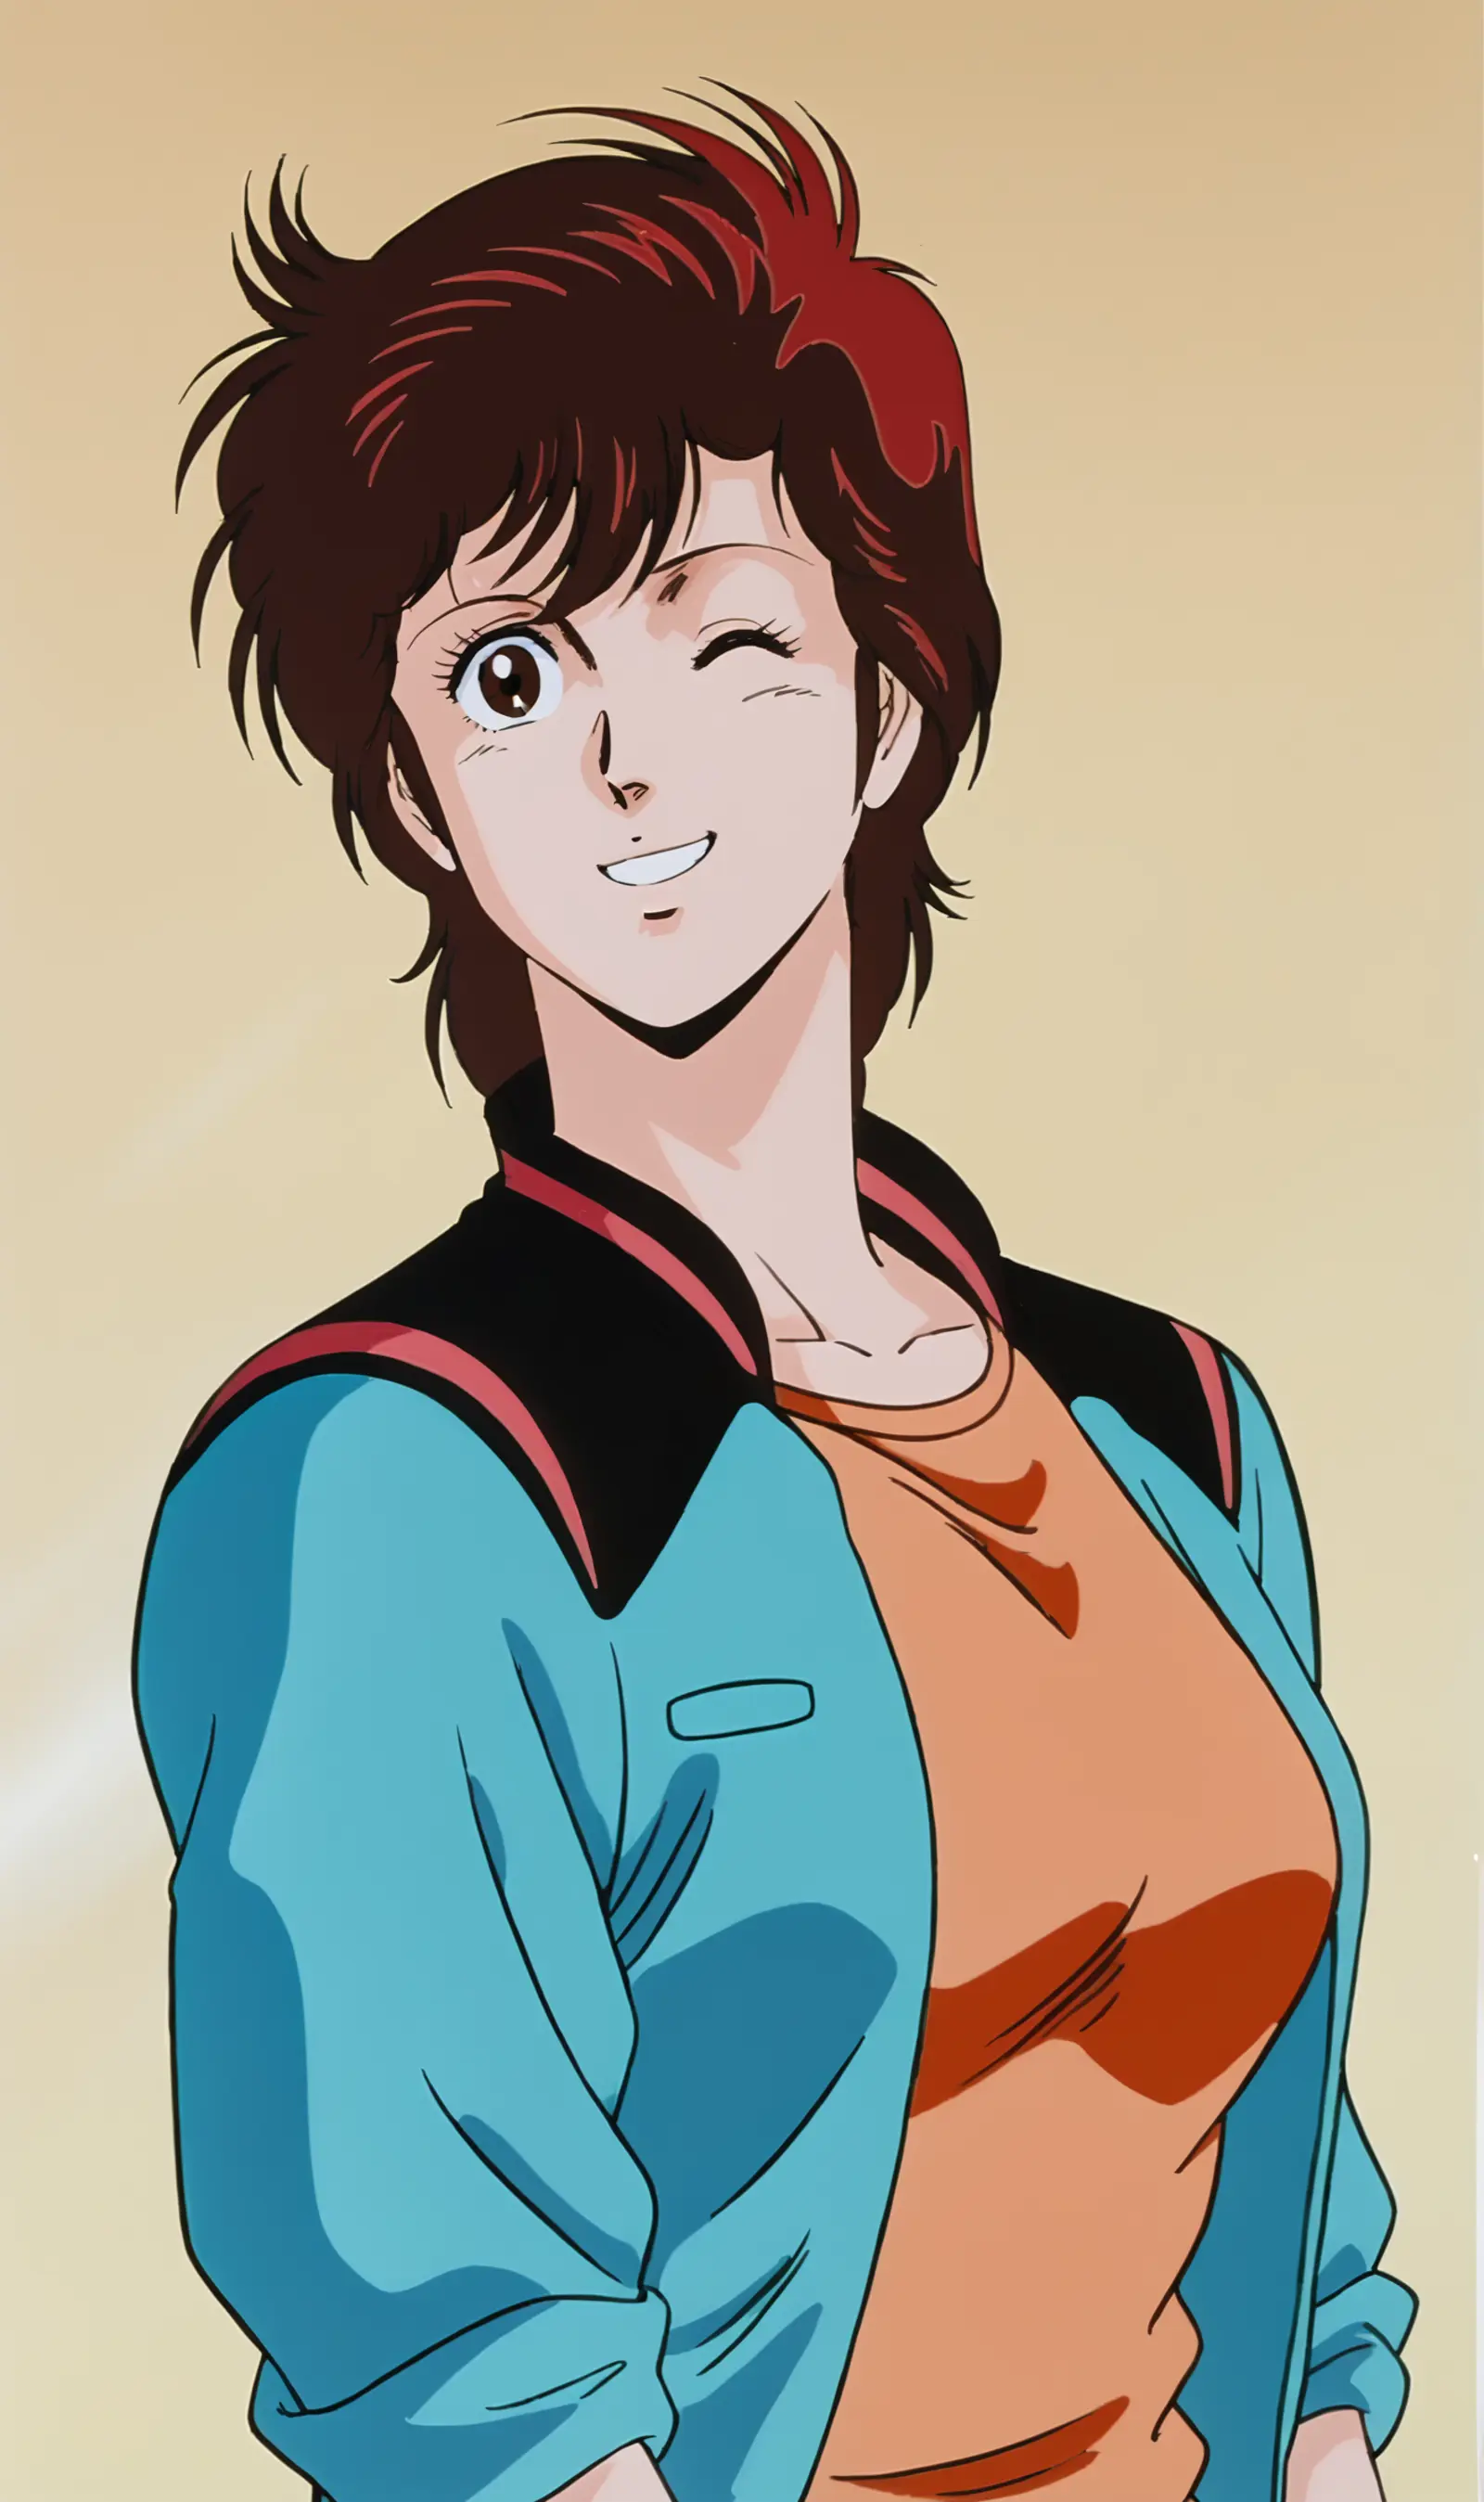 A woman with short red hair is winking and smiling broadly. Her attire consists of a blue jacket with a black and red collar, worn over an orange shirt. The background is a soft yellow.